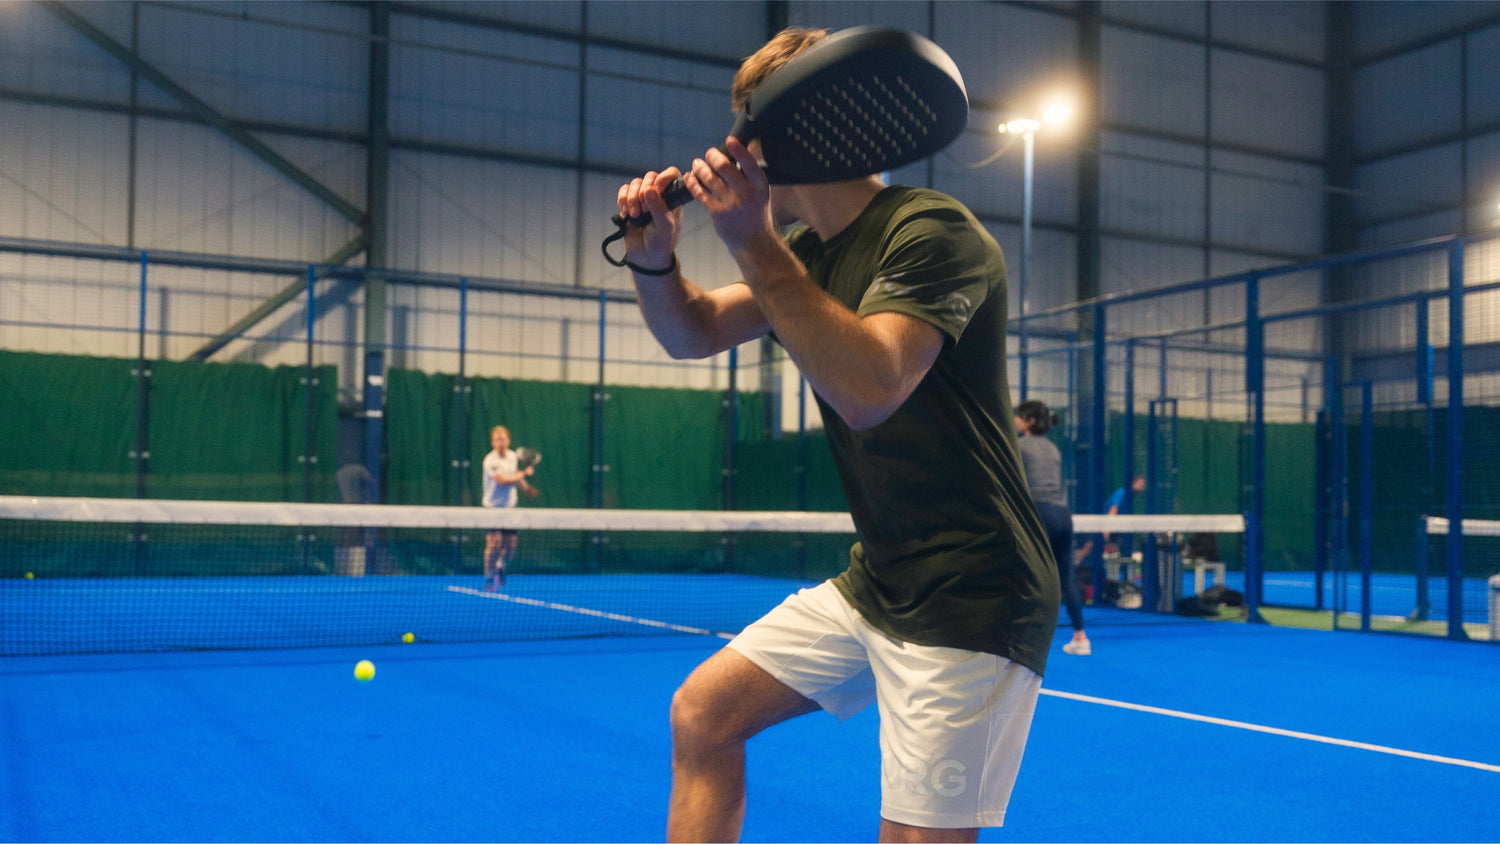 VIBEPADEL emerged from a passion for padel and a vision to bridge the gap between mainstream tennis brands and exclusive padel elites. We're on a journey to transform this game into an inclusive, stylish movement combining performance with refined aesthetics